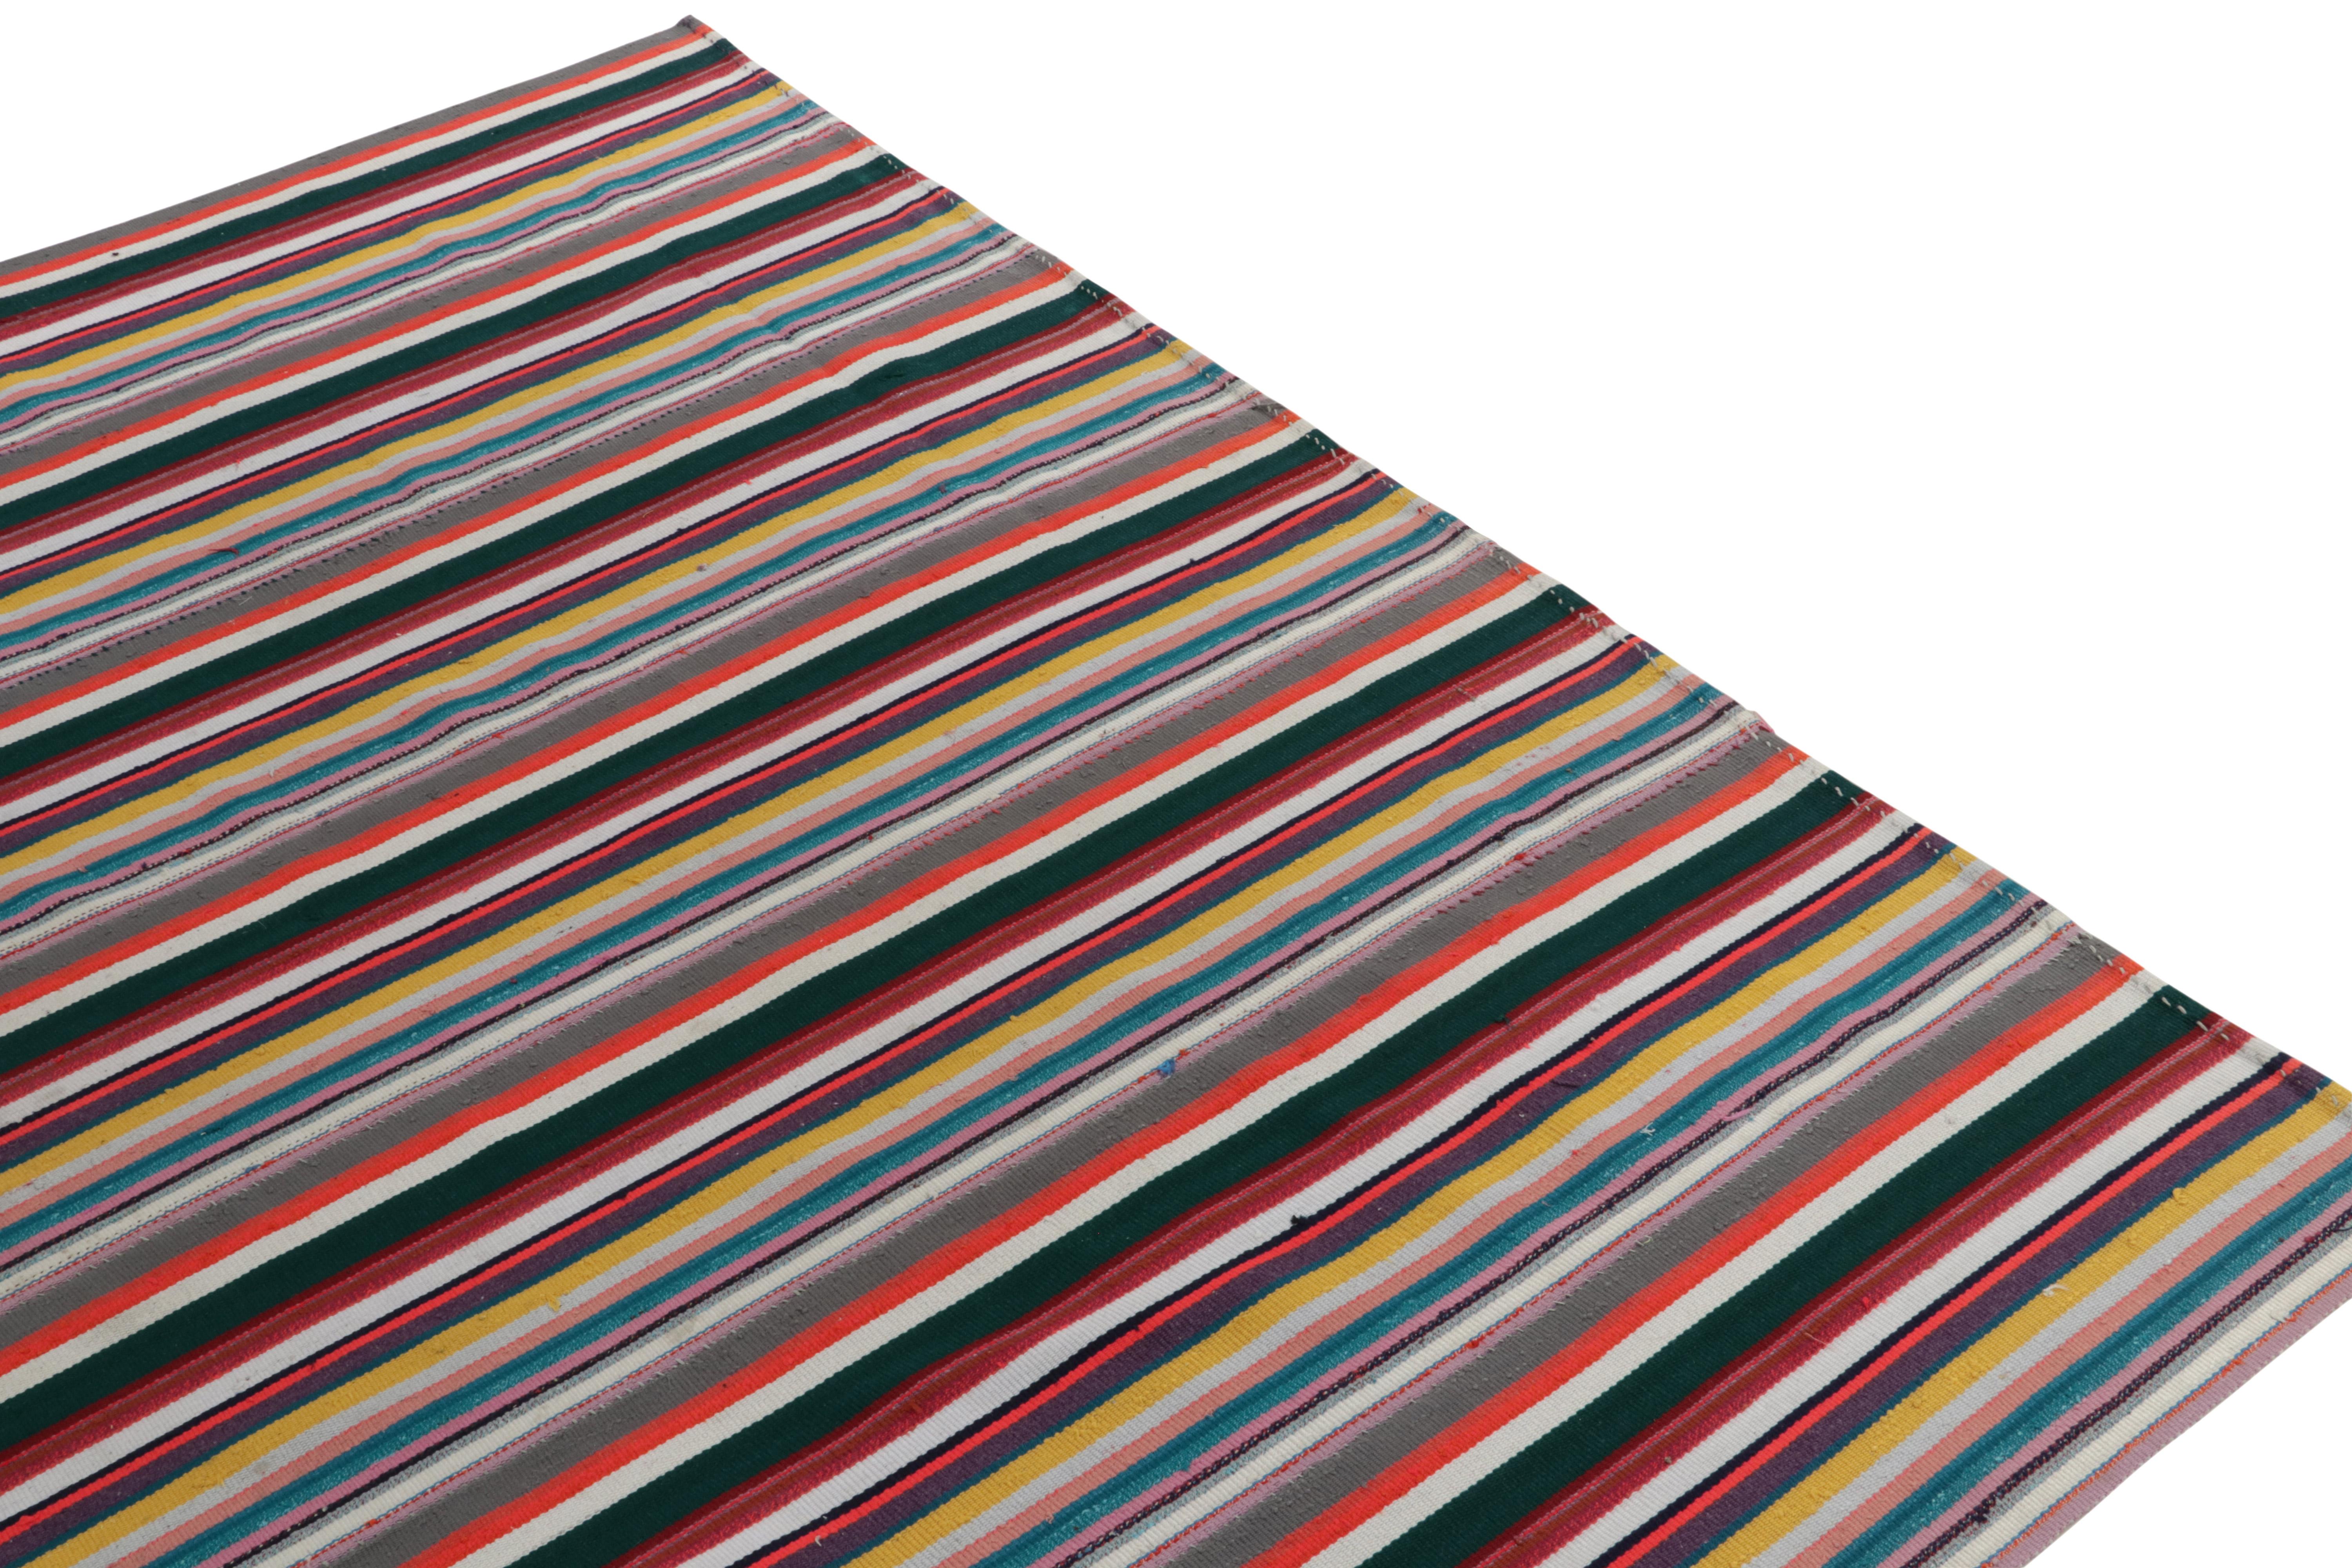 Hand-Knotted 1950s Vintage Chaput Kilim Rug in Multicolor Stripe Patterns, by Rug & Kilim For Sale